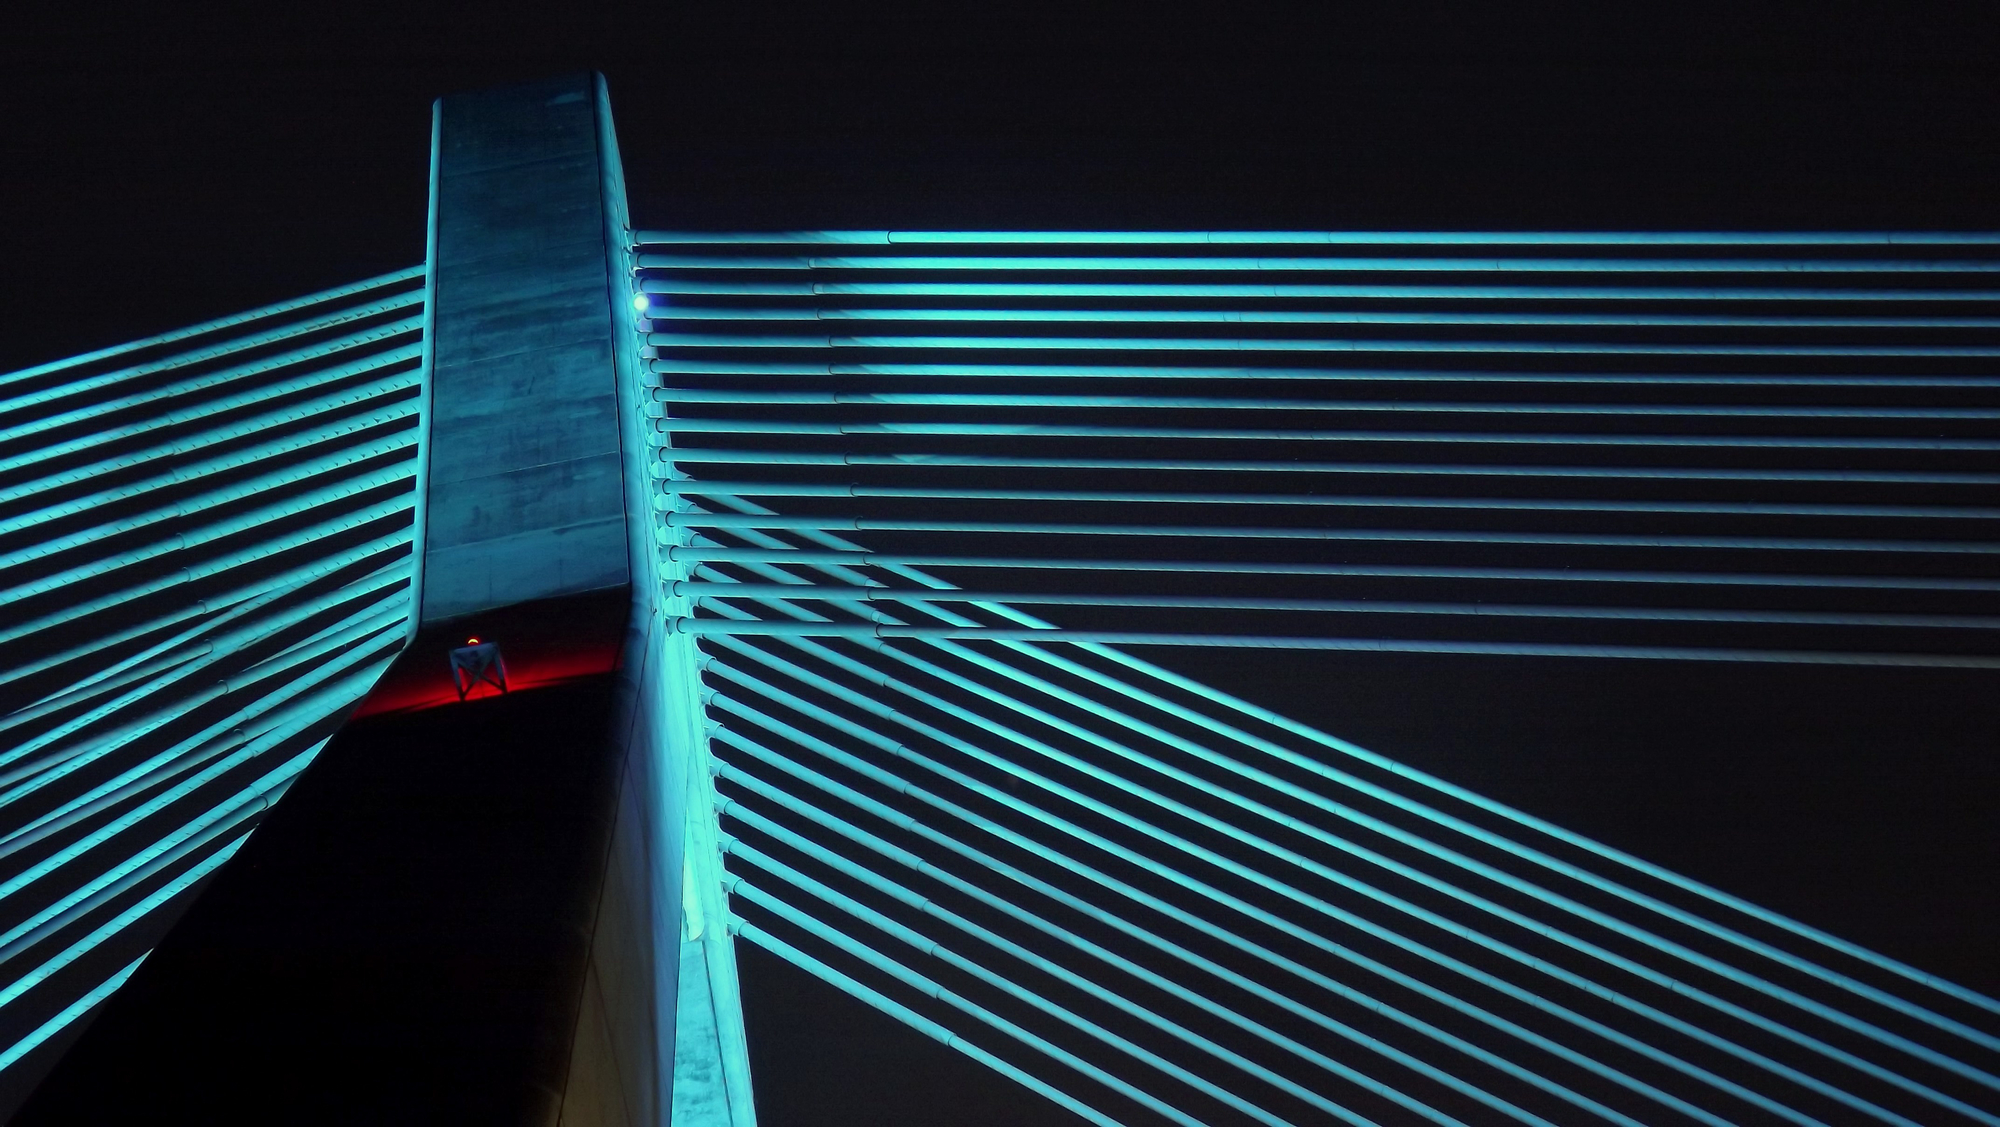 Image of the cross section of a bridge at night time